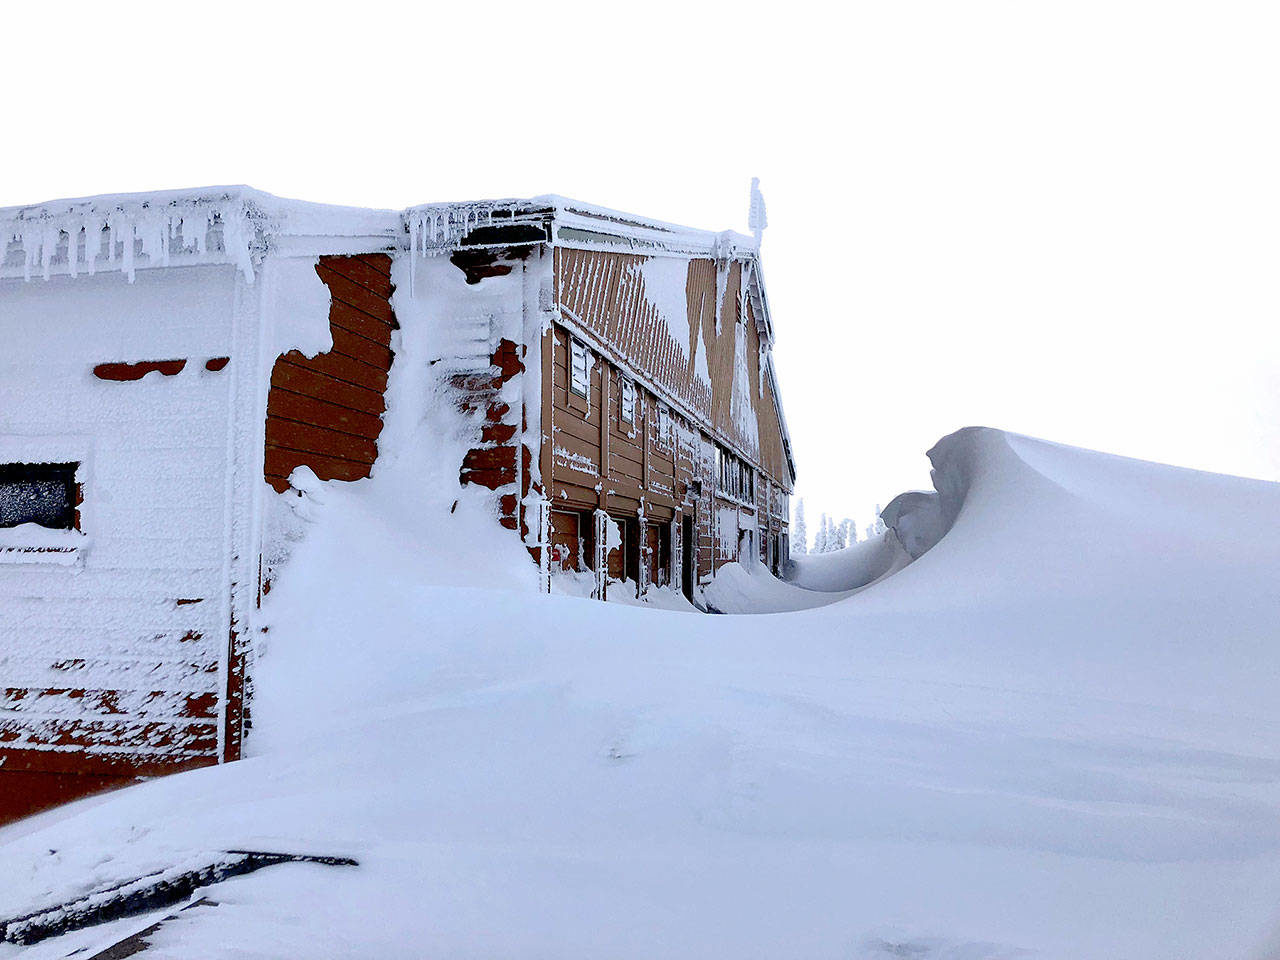 Fourteen-foot snow drifts were sculpted by high wind near the visitor center at Hurricane Ridge in the photograph taken Friday.